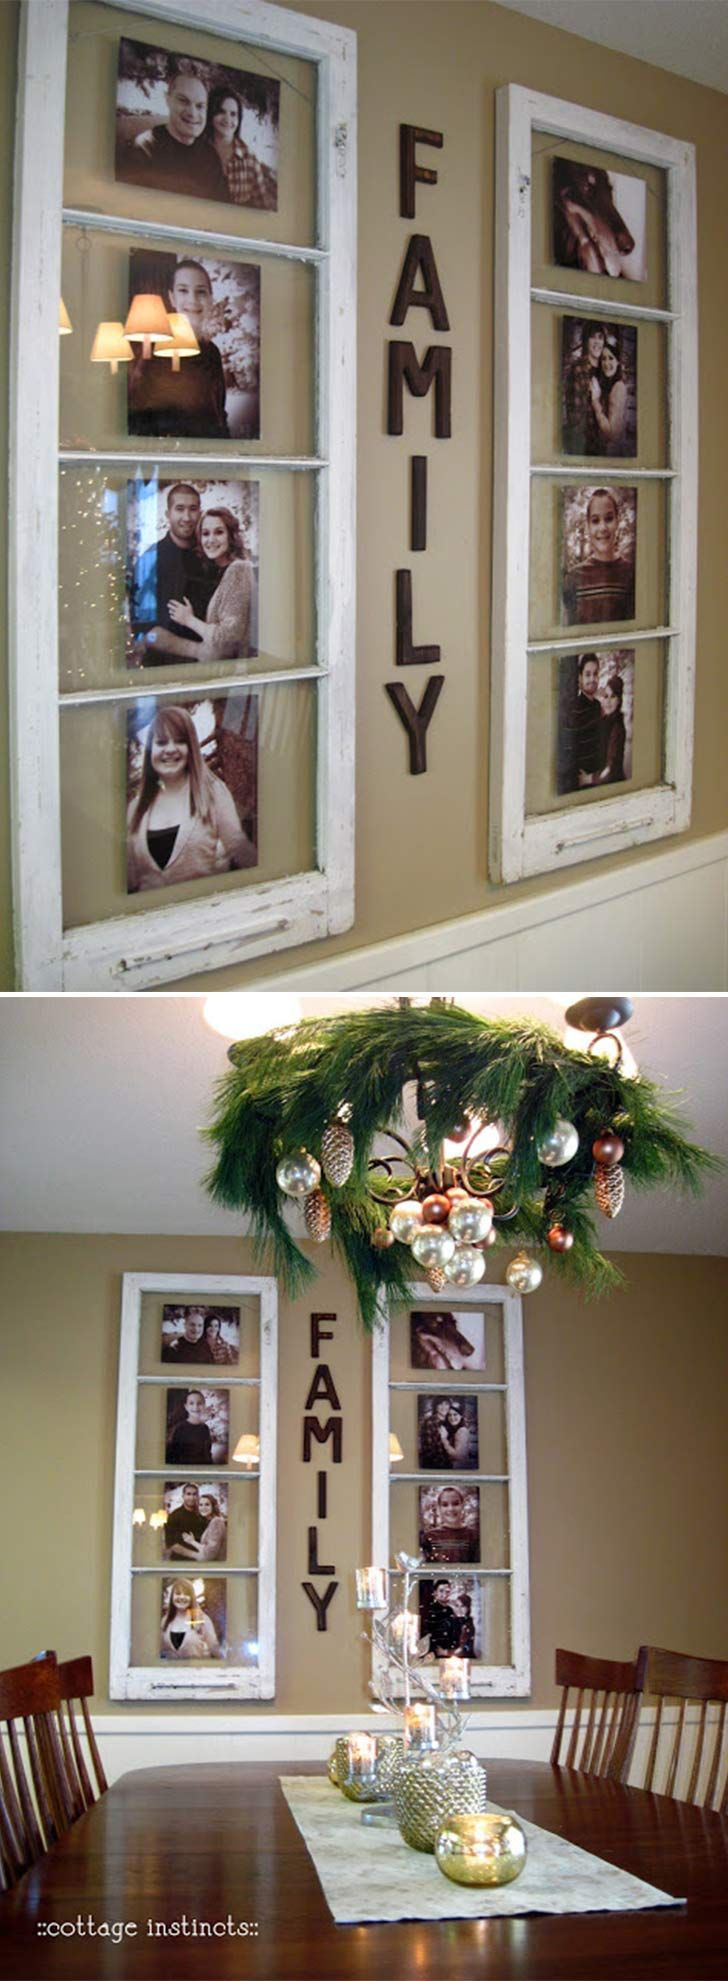 Home Diy
 DIY Family Display on image to see more home